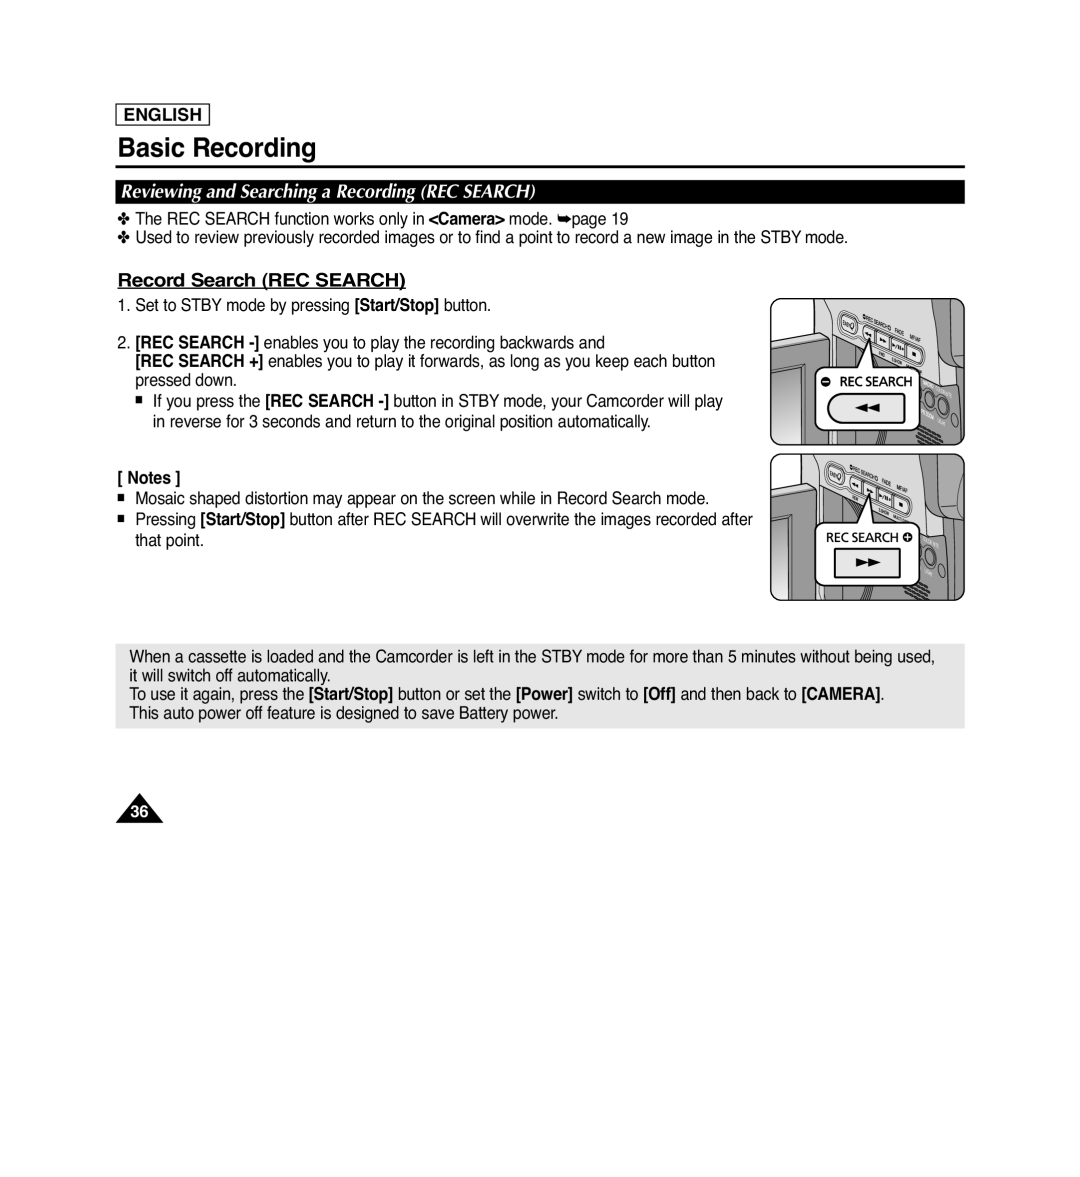 Samsung SC-D263 manual Record Search REC SEARCH, Reviewing and Searching a Recording REC SEARCH, Basic Recording, English 